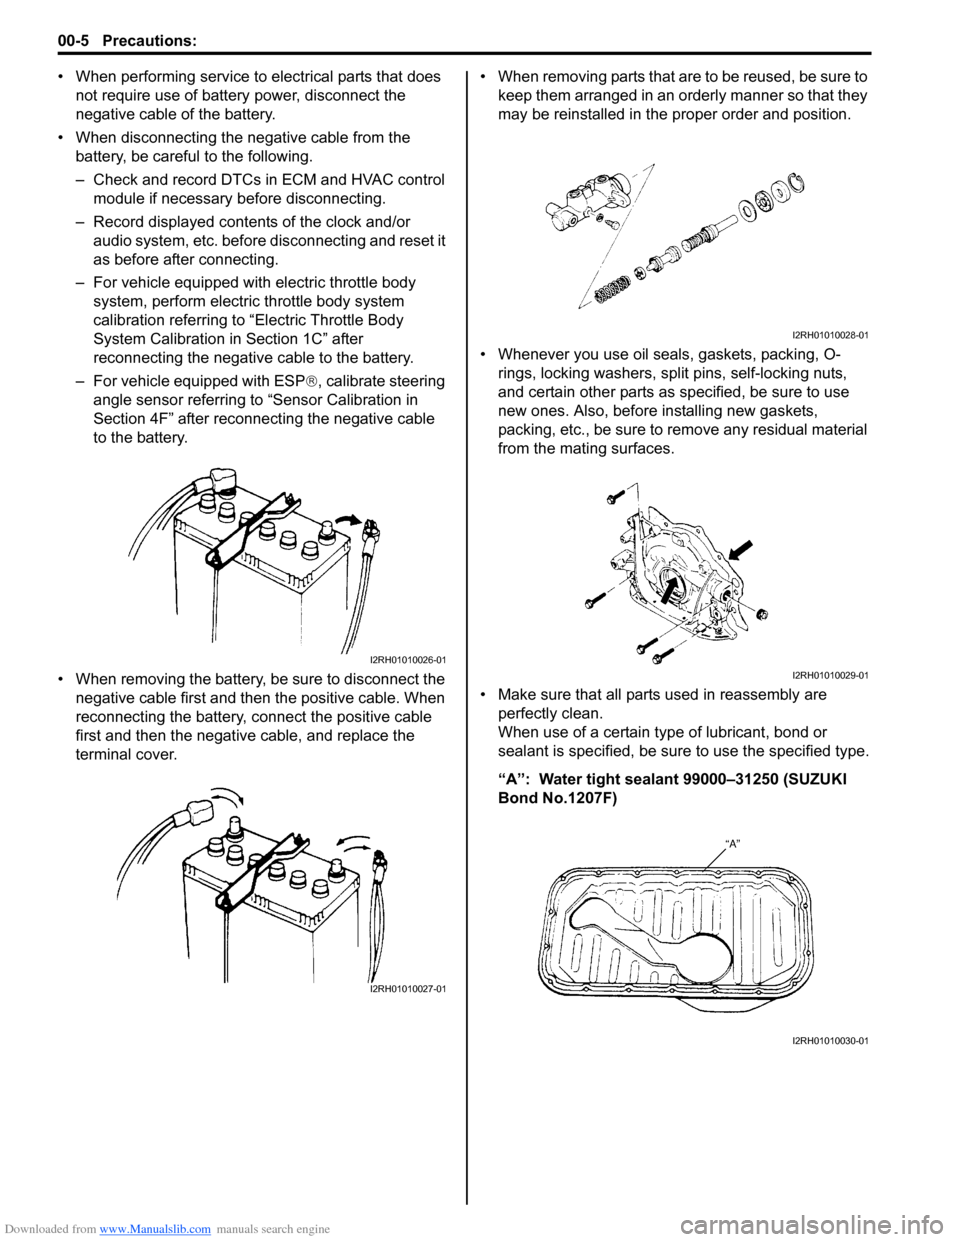 SUZUKI SWIFT 2008 2.G Service Workshop Manual Downloaded from www.Manualslib.com manuals search engine 00-5 Precautions: 
• When performing service to electrical parts that does not require use of battery power, disconnect the 
negative cable o